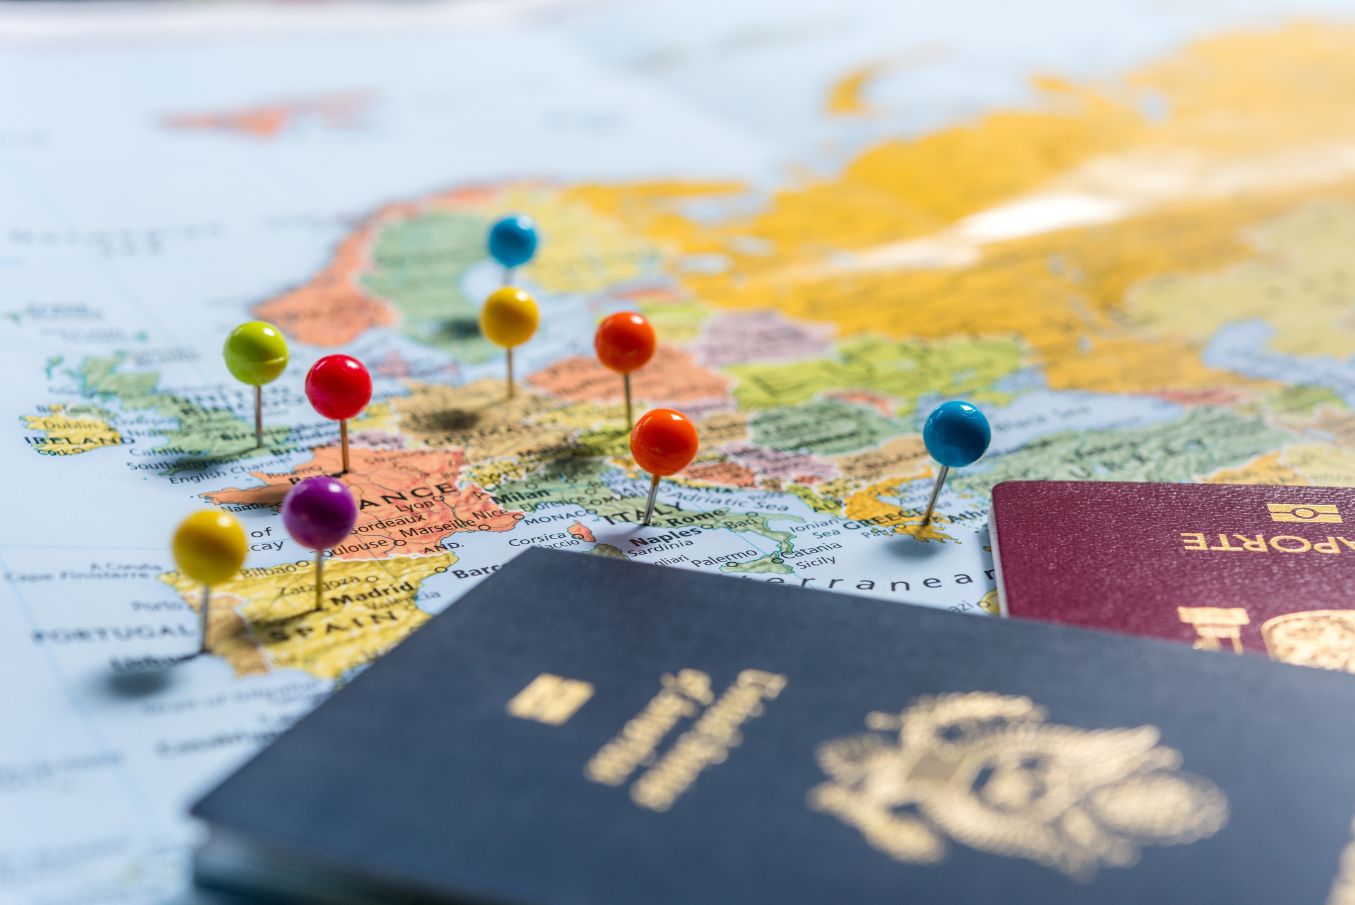 A map with pins stuck into it, and two passports on top of it.